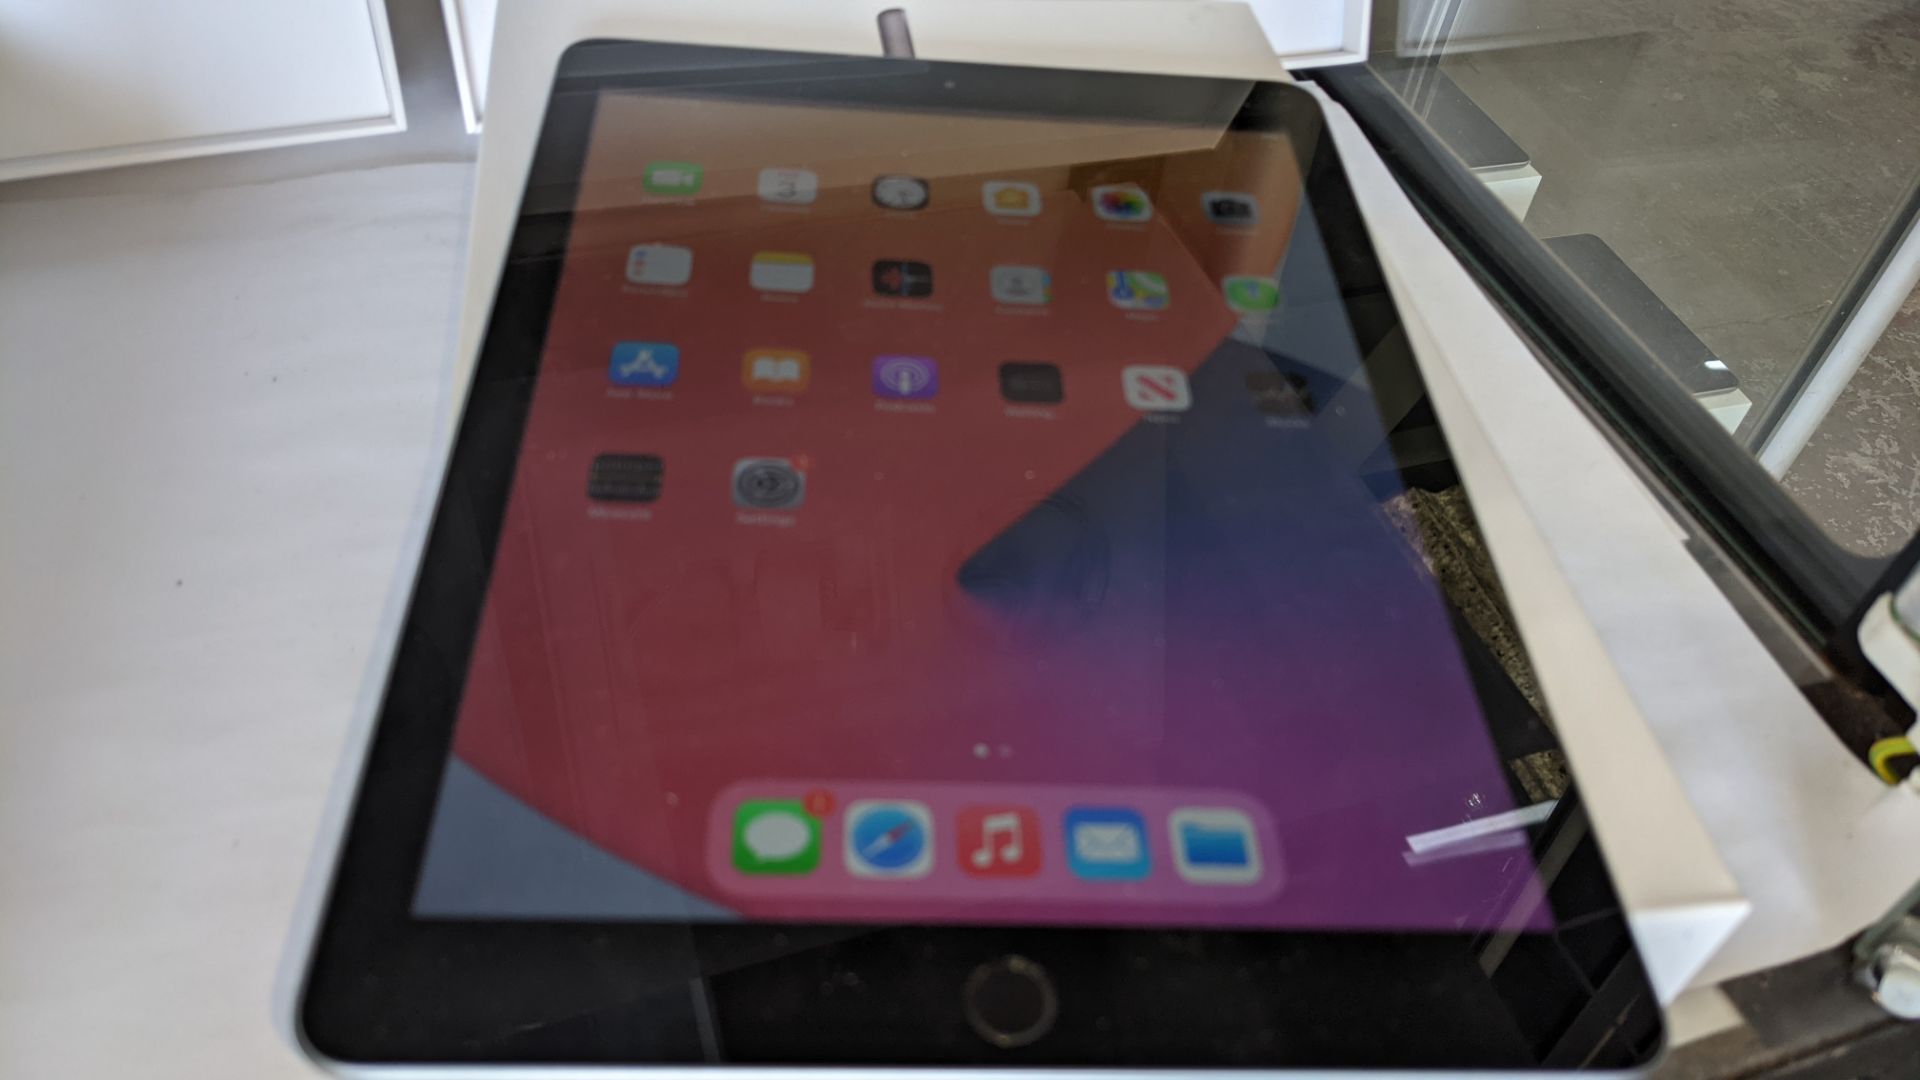 Apple iPad (space grey) 5th generation 32Gb Wi-Fi 9.7" Retina screen. Product code A1822. Apple A9 - Image 12 of 12